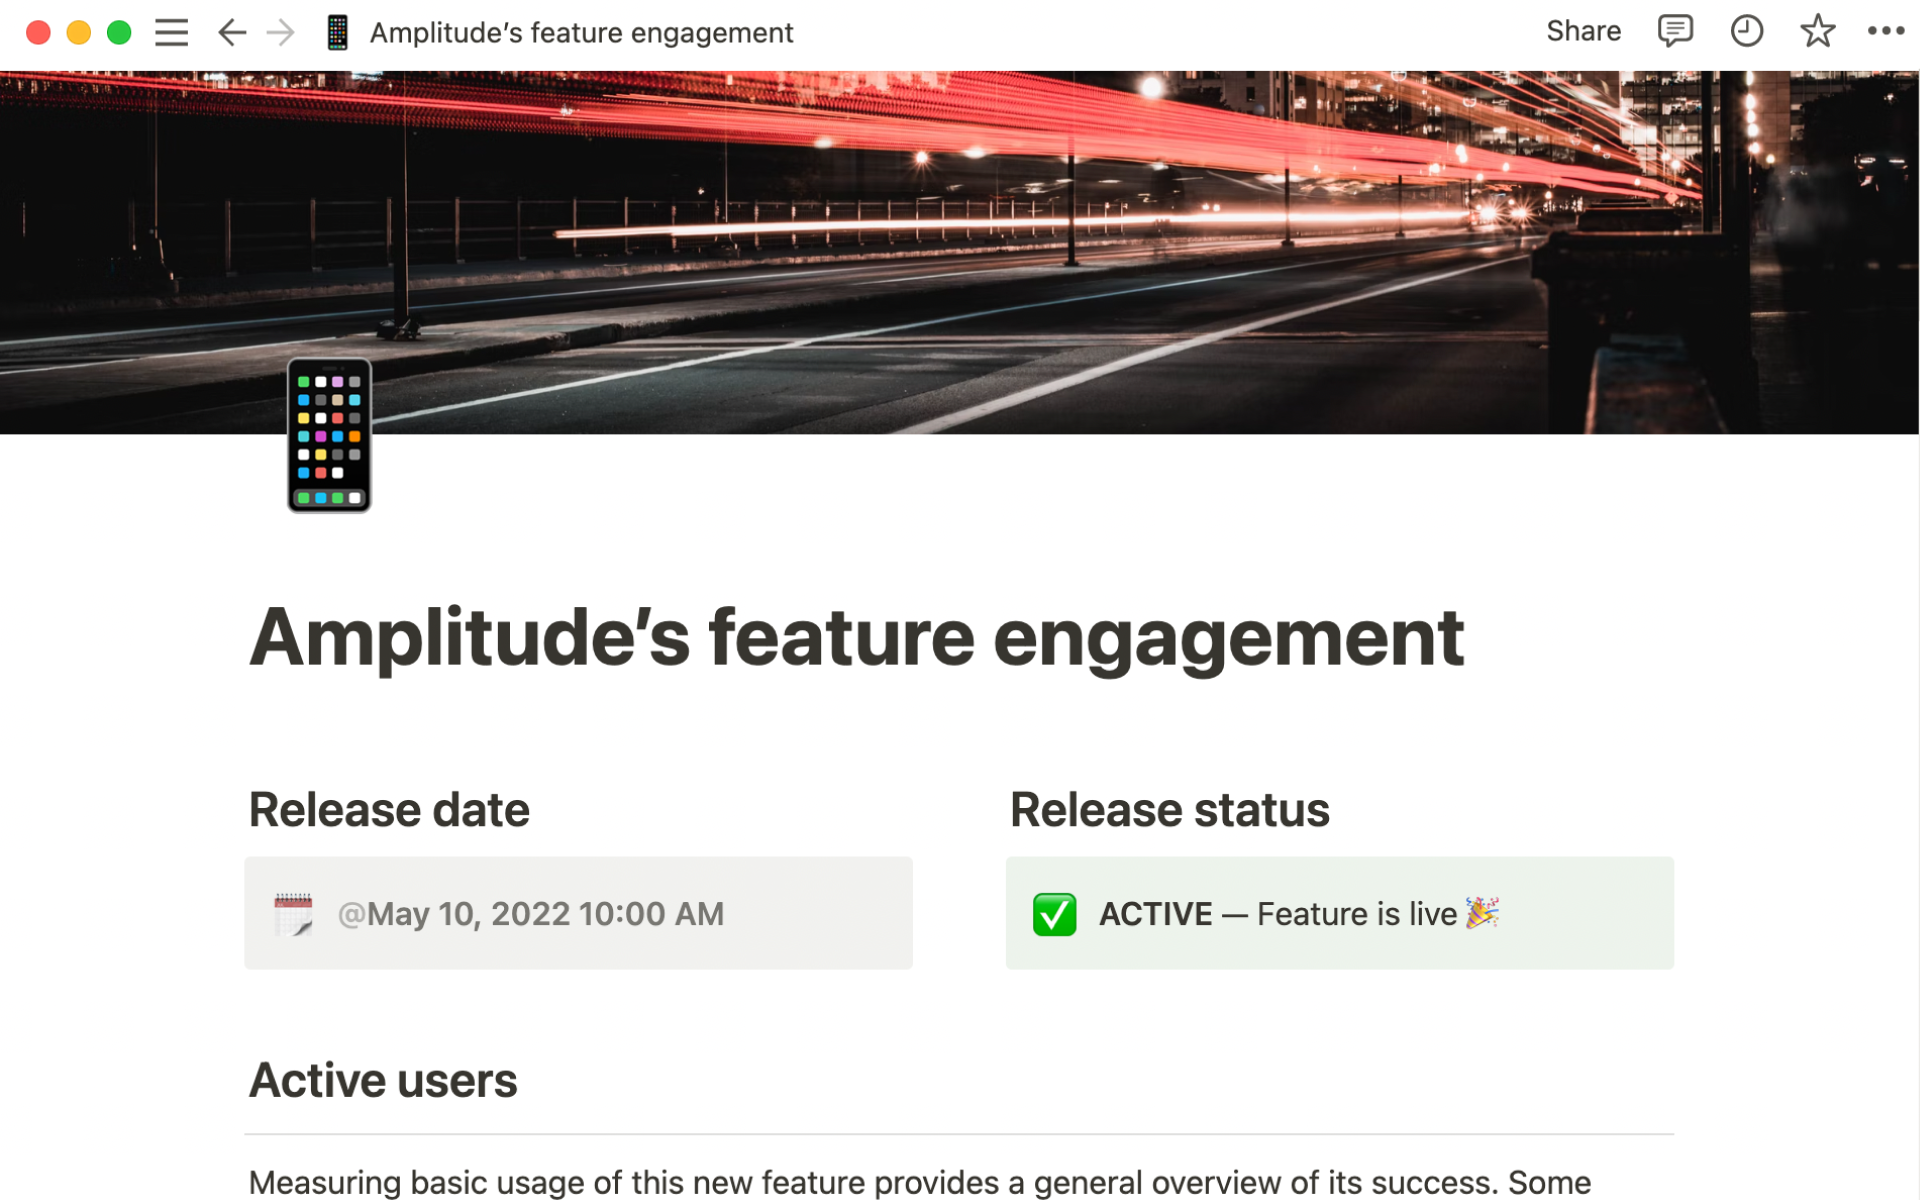 Track feature adoption and other Amplitude metrics directly in Notion!